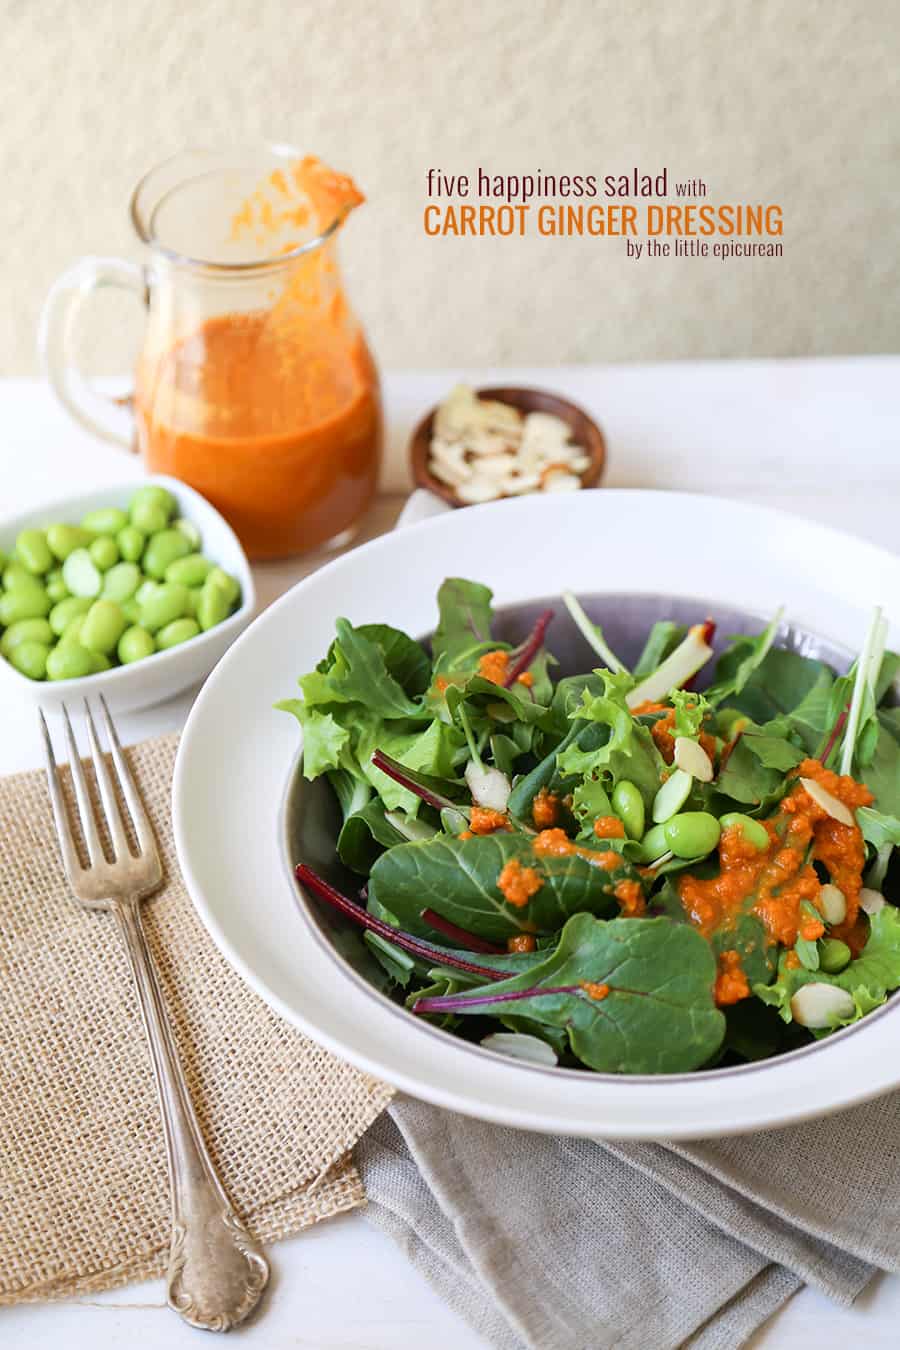 Five Happiness Salad with Carrot Ginger Dressing - The Little Epicurean